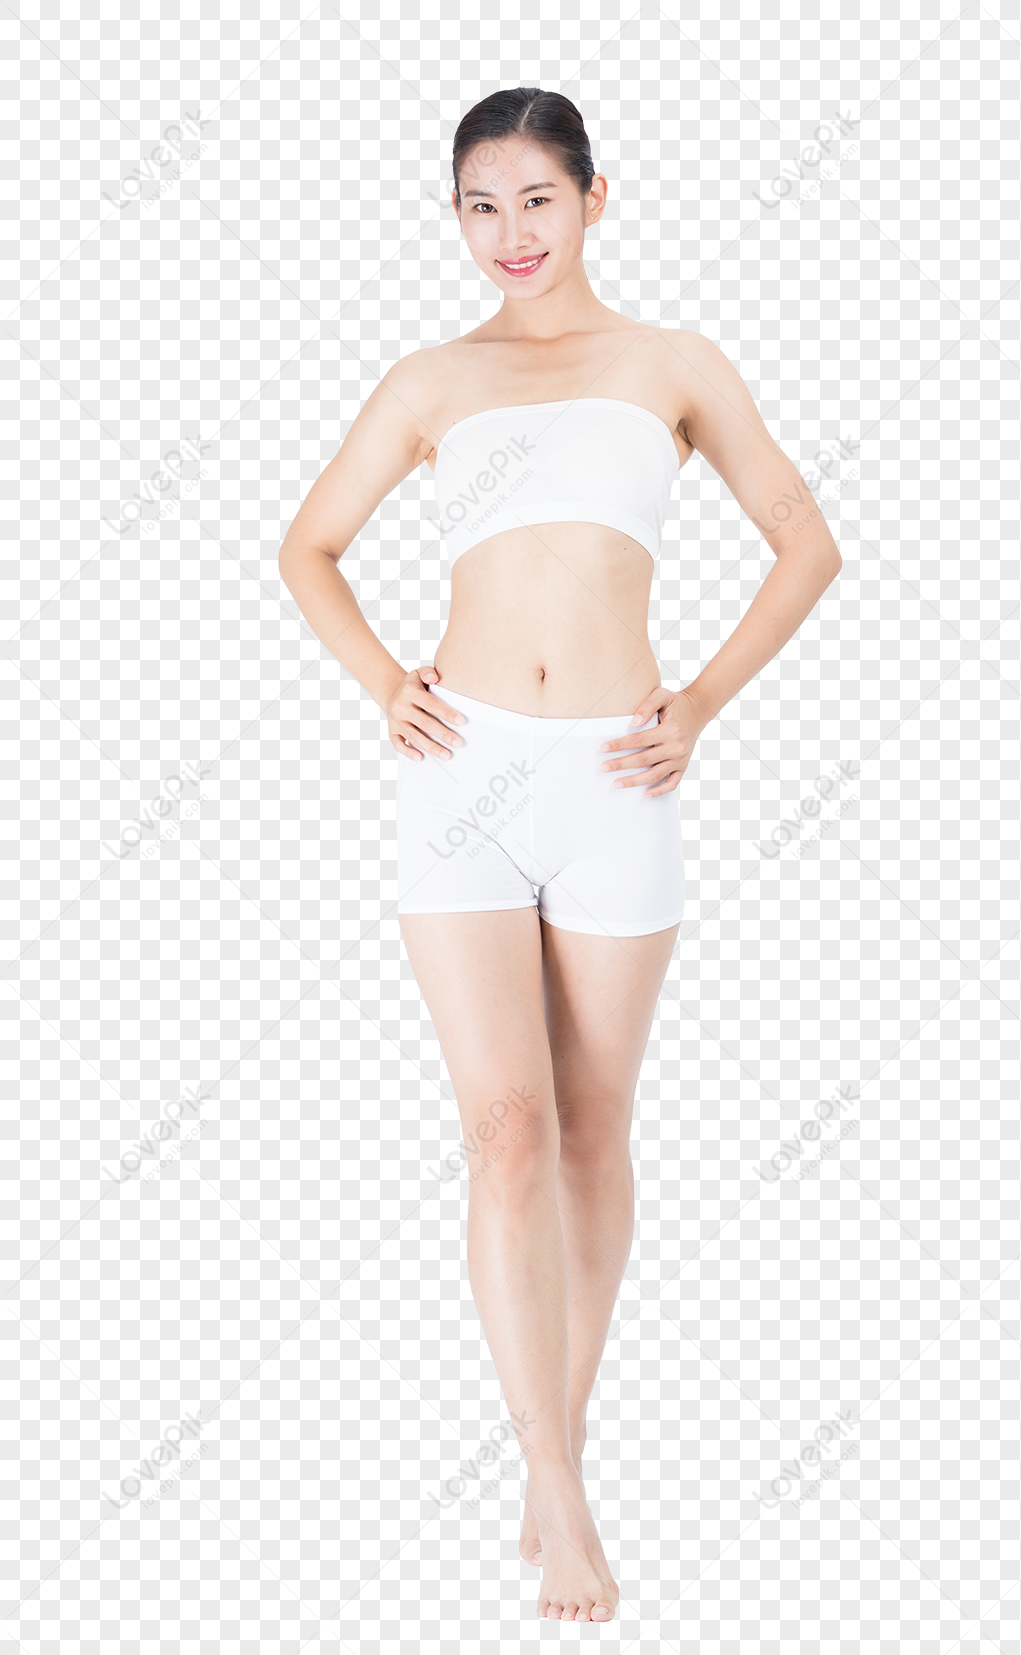 Beauty body and body presentation, standing woman, body woman, body white png transparent background